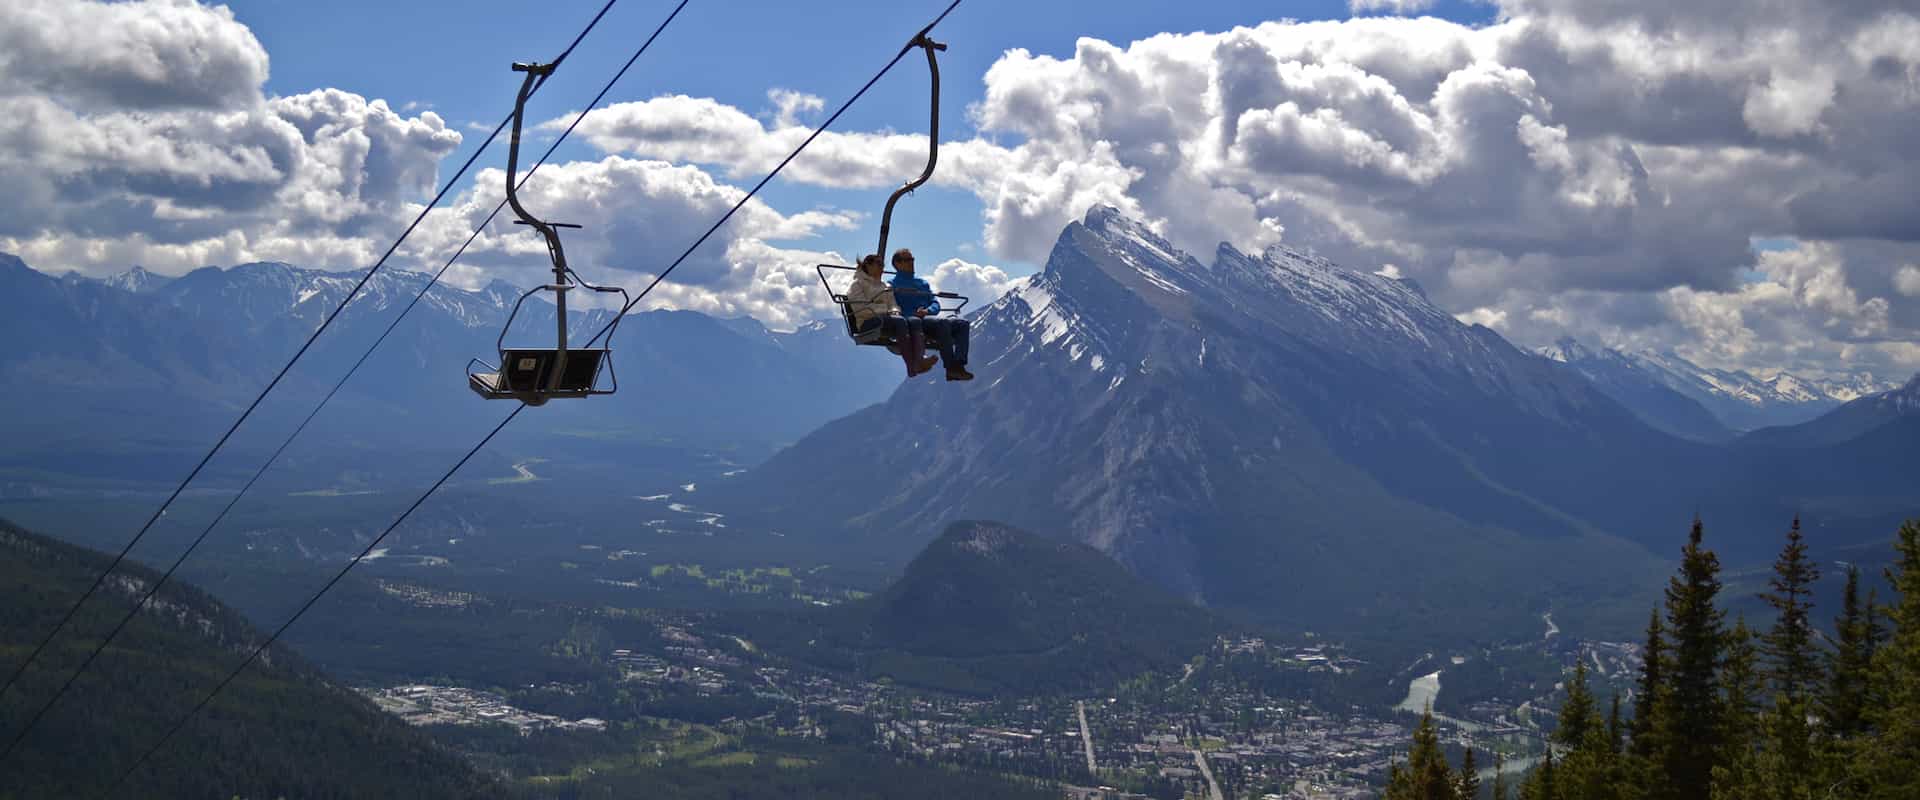 Panoramic views over Banff on the Mount Norquay Banff Sightseeing Chairlift